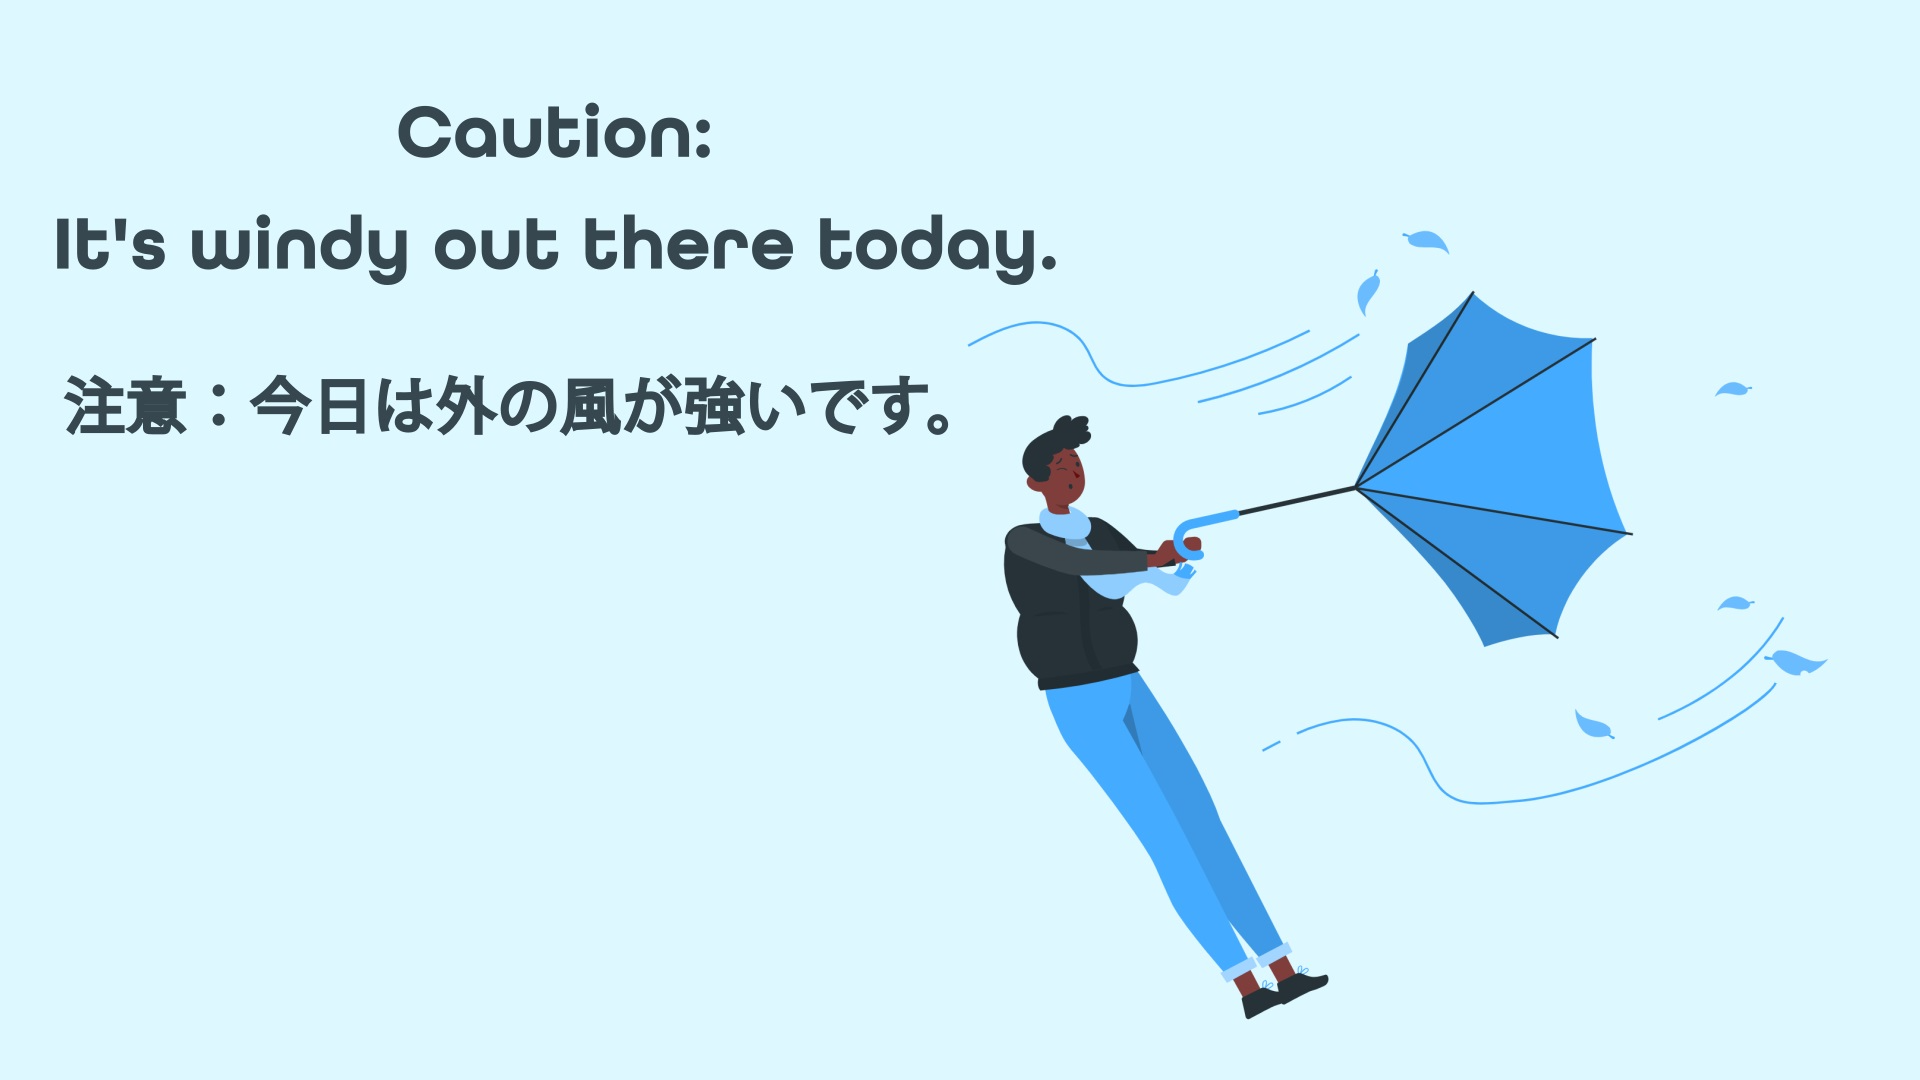 Featured image for “Caution: It’s windy out there today.  注意：今日は外の風が強いです。”